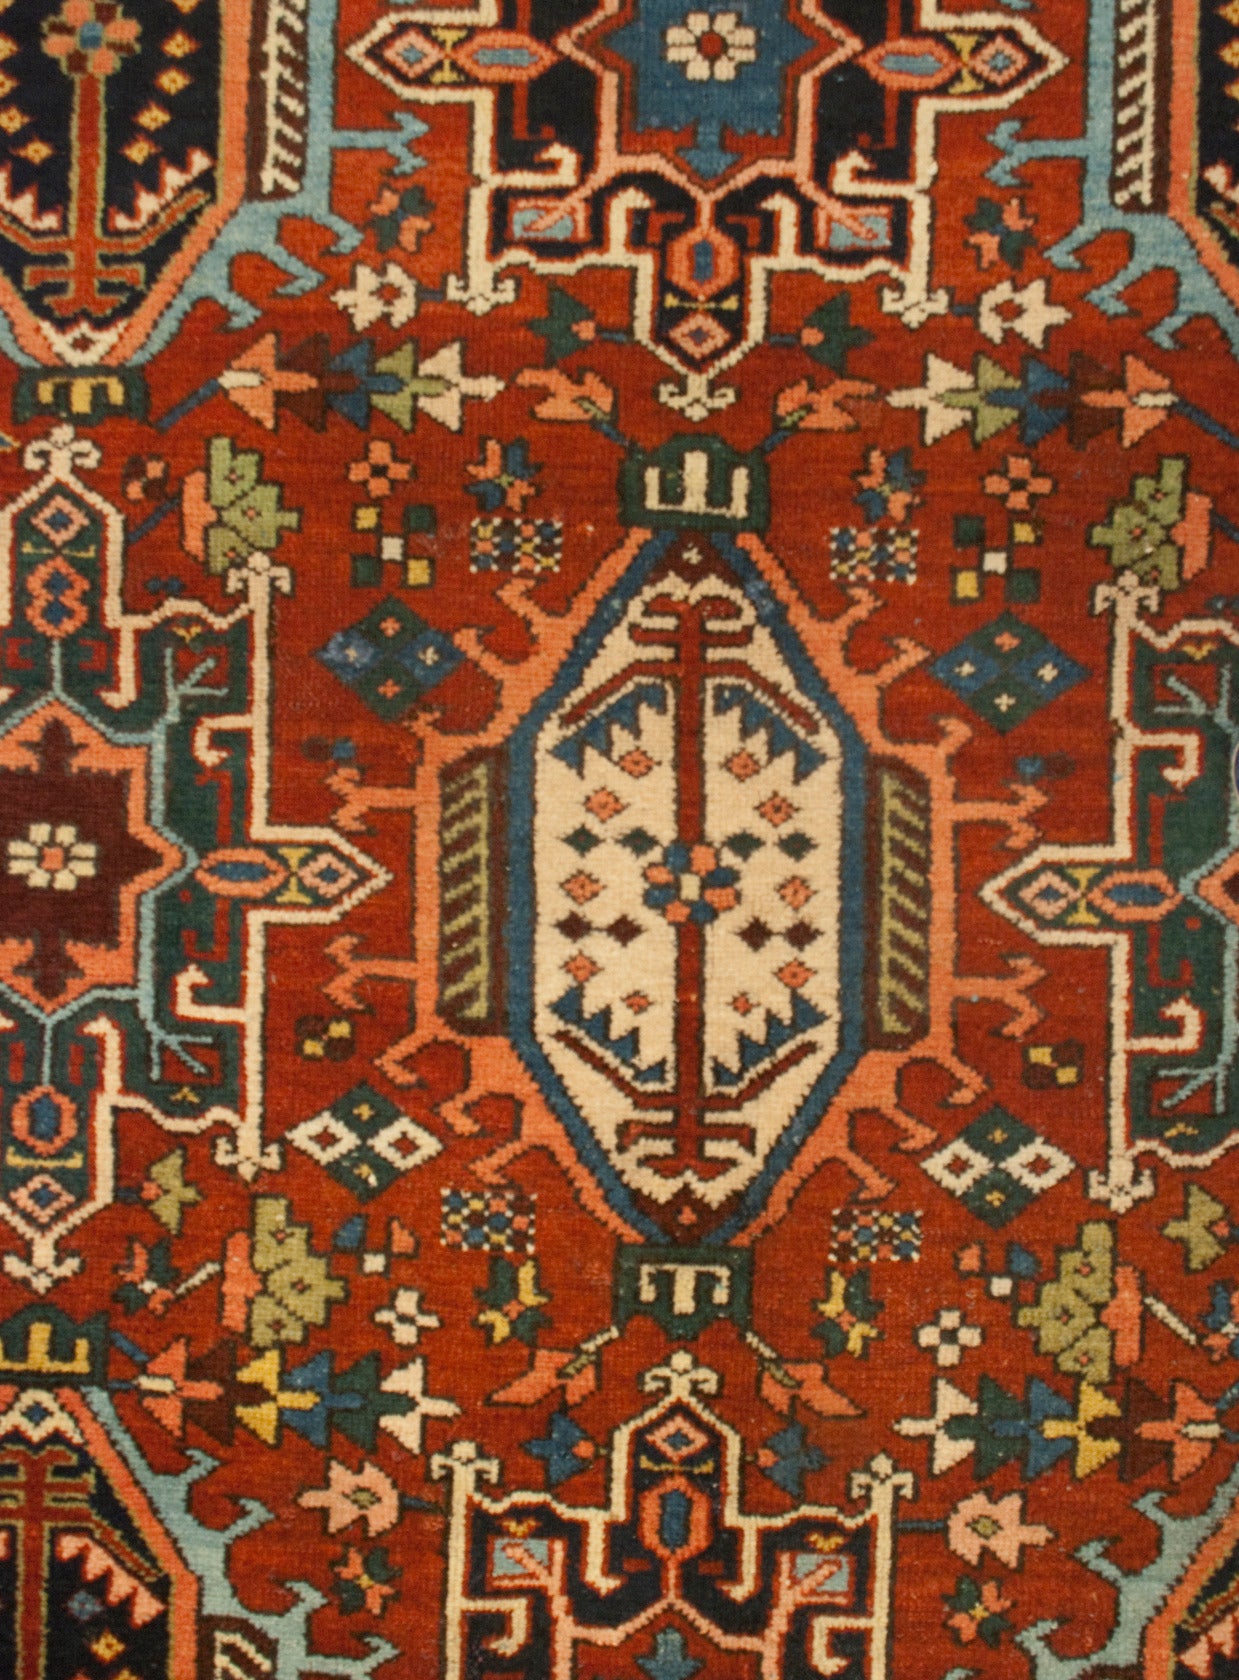 An early 20th century Persian Karaja Heriz rug with multiple large-scale geometric and floral medallions amidst a field of flowers, on a crimson background, surrounded by multiple floral borders.